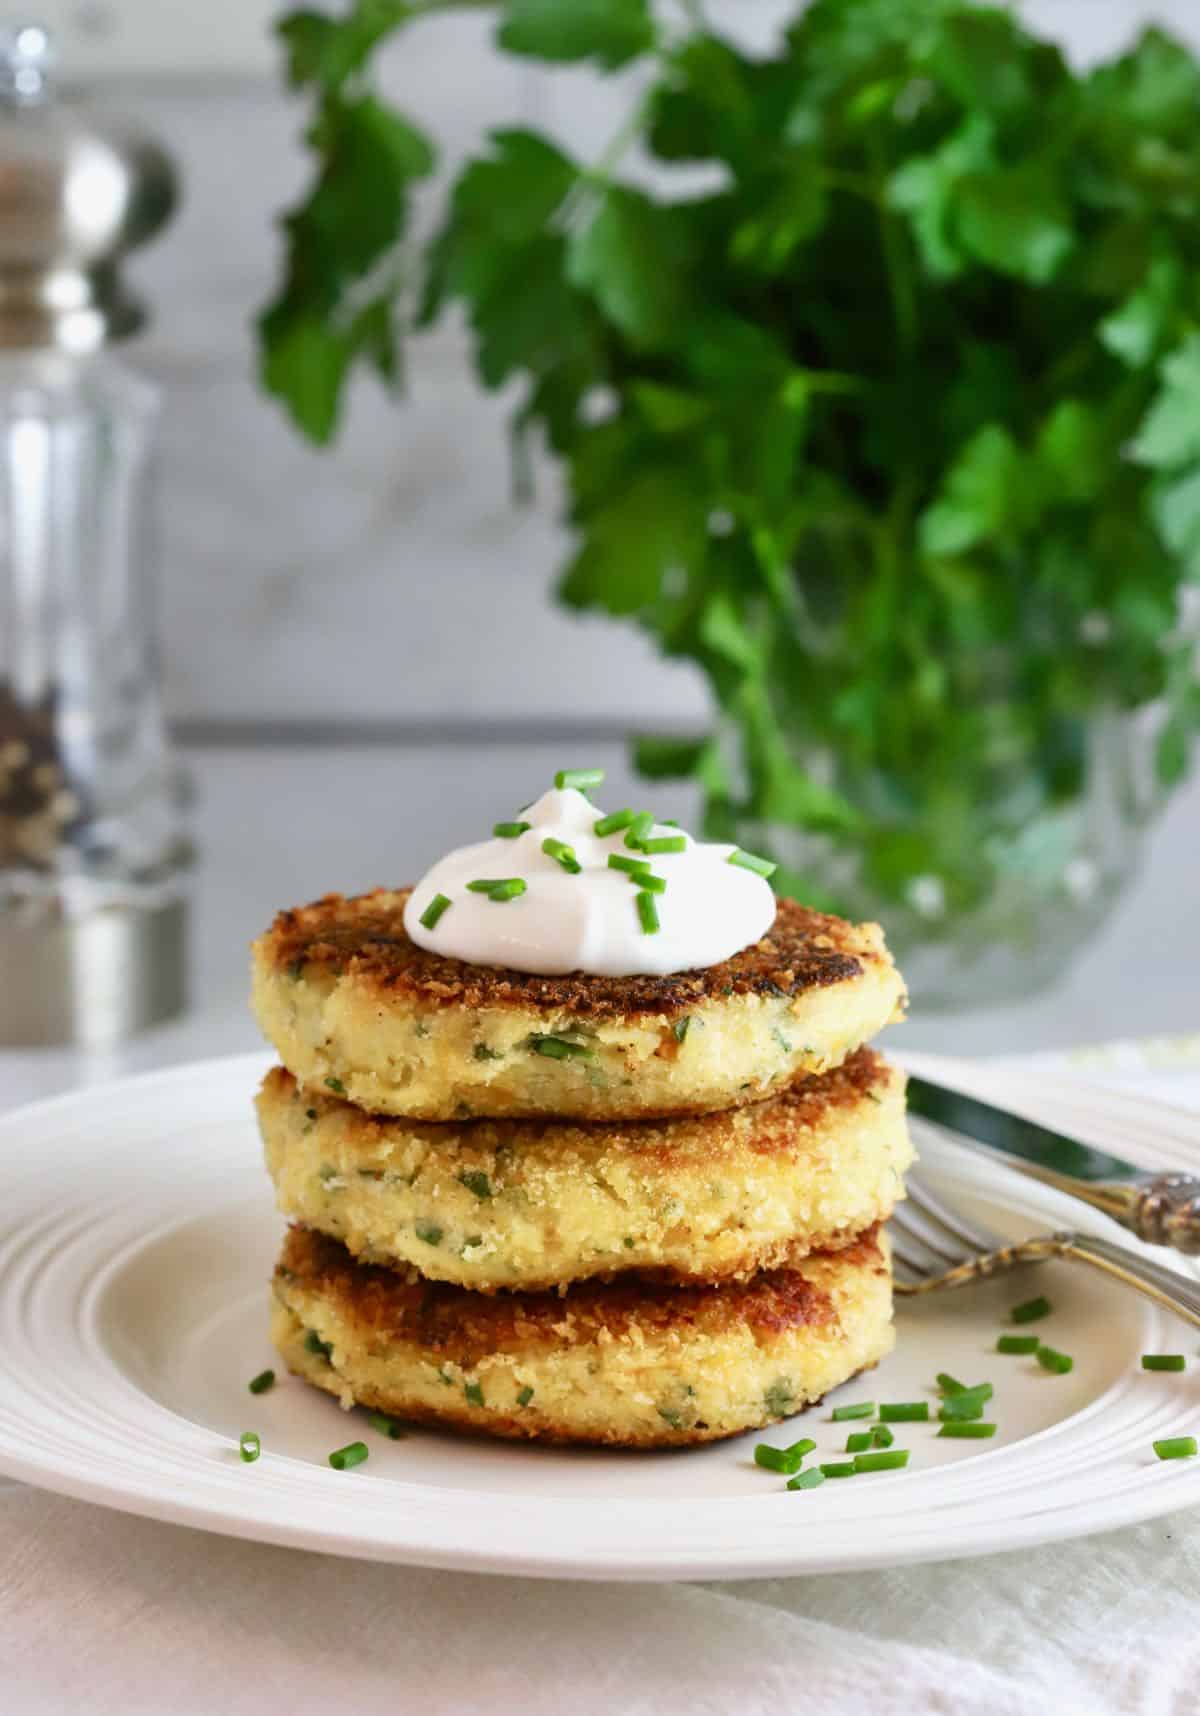 Three potato fritters on a plate.